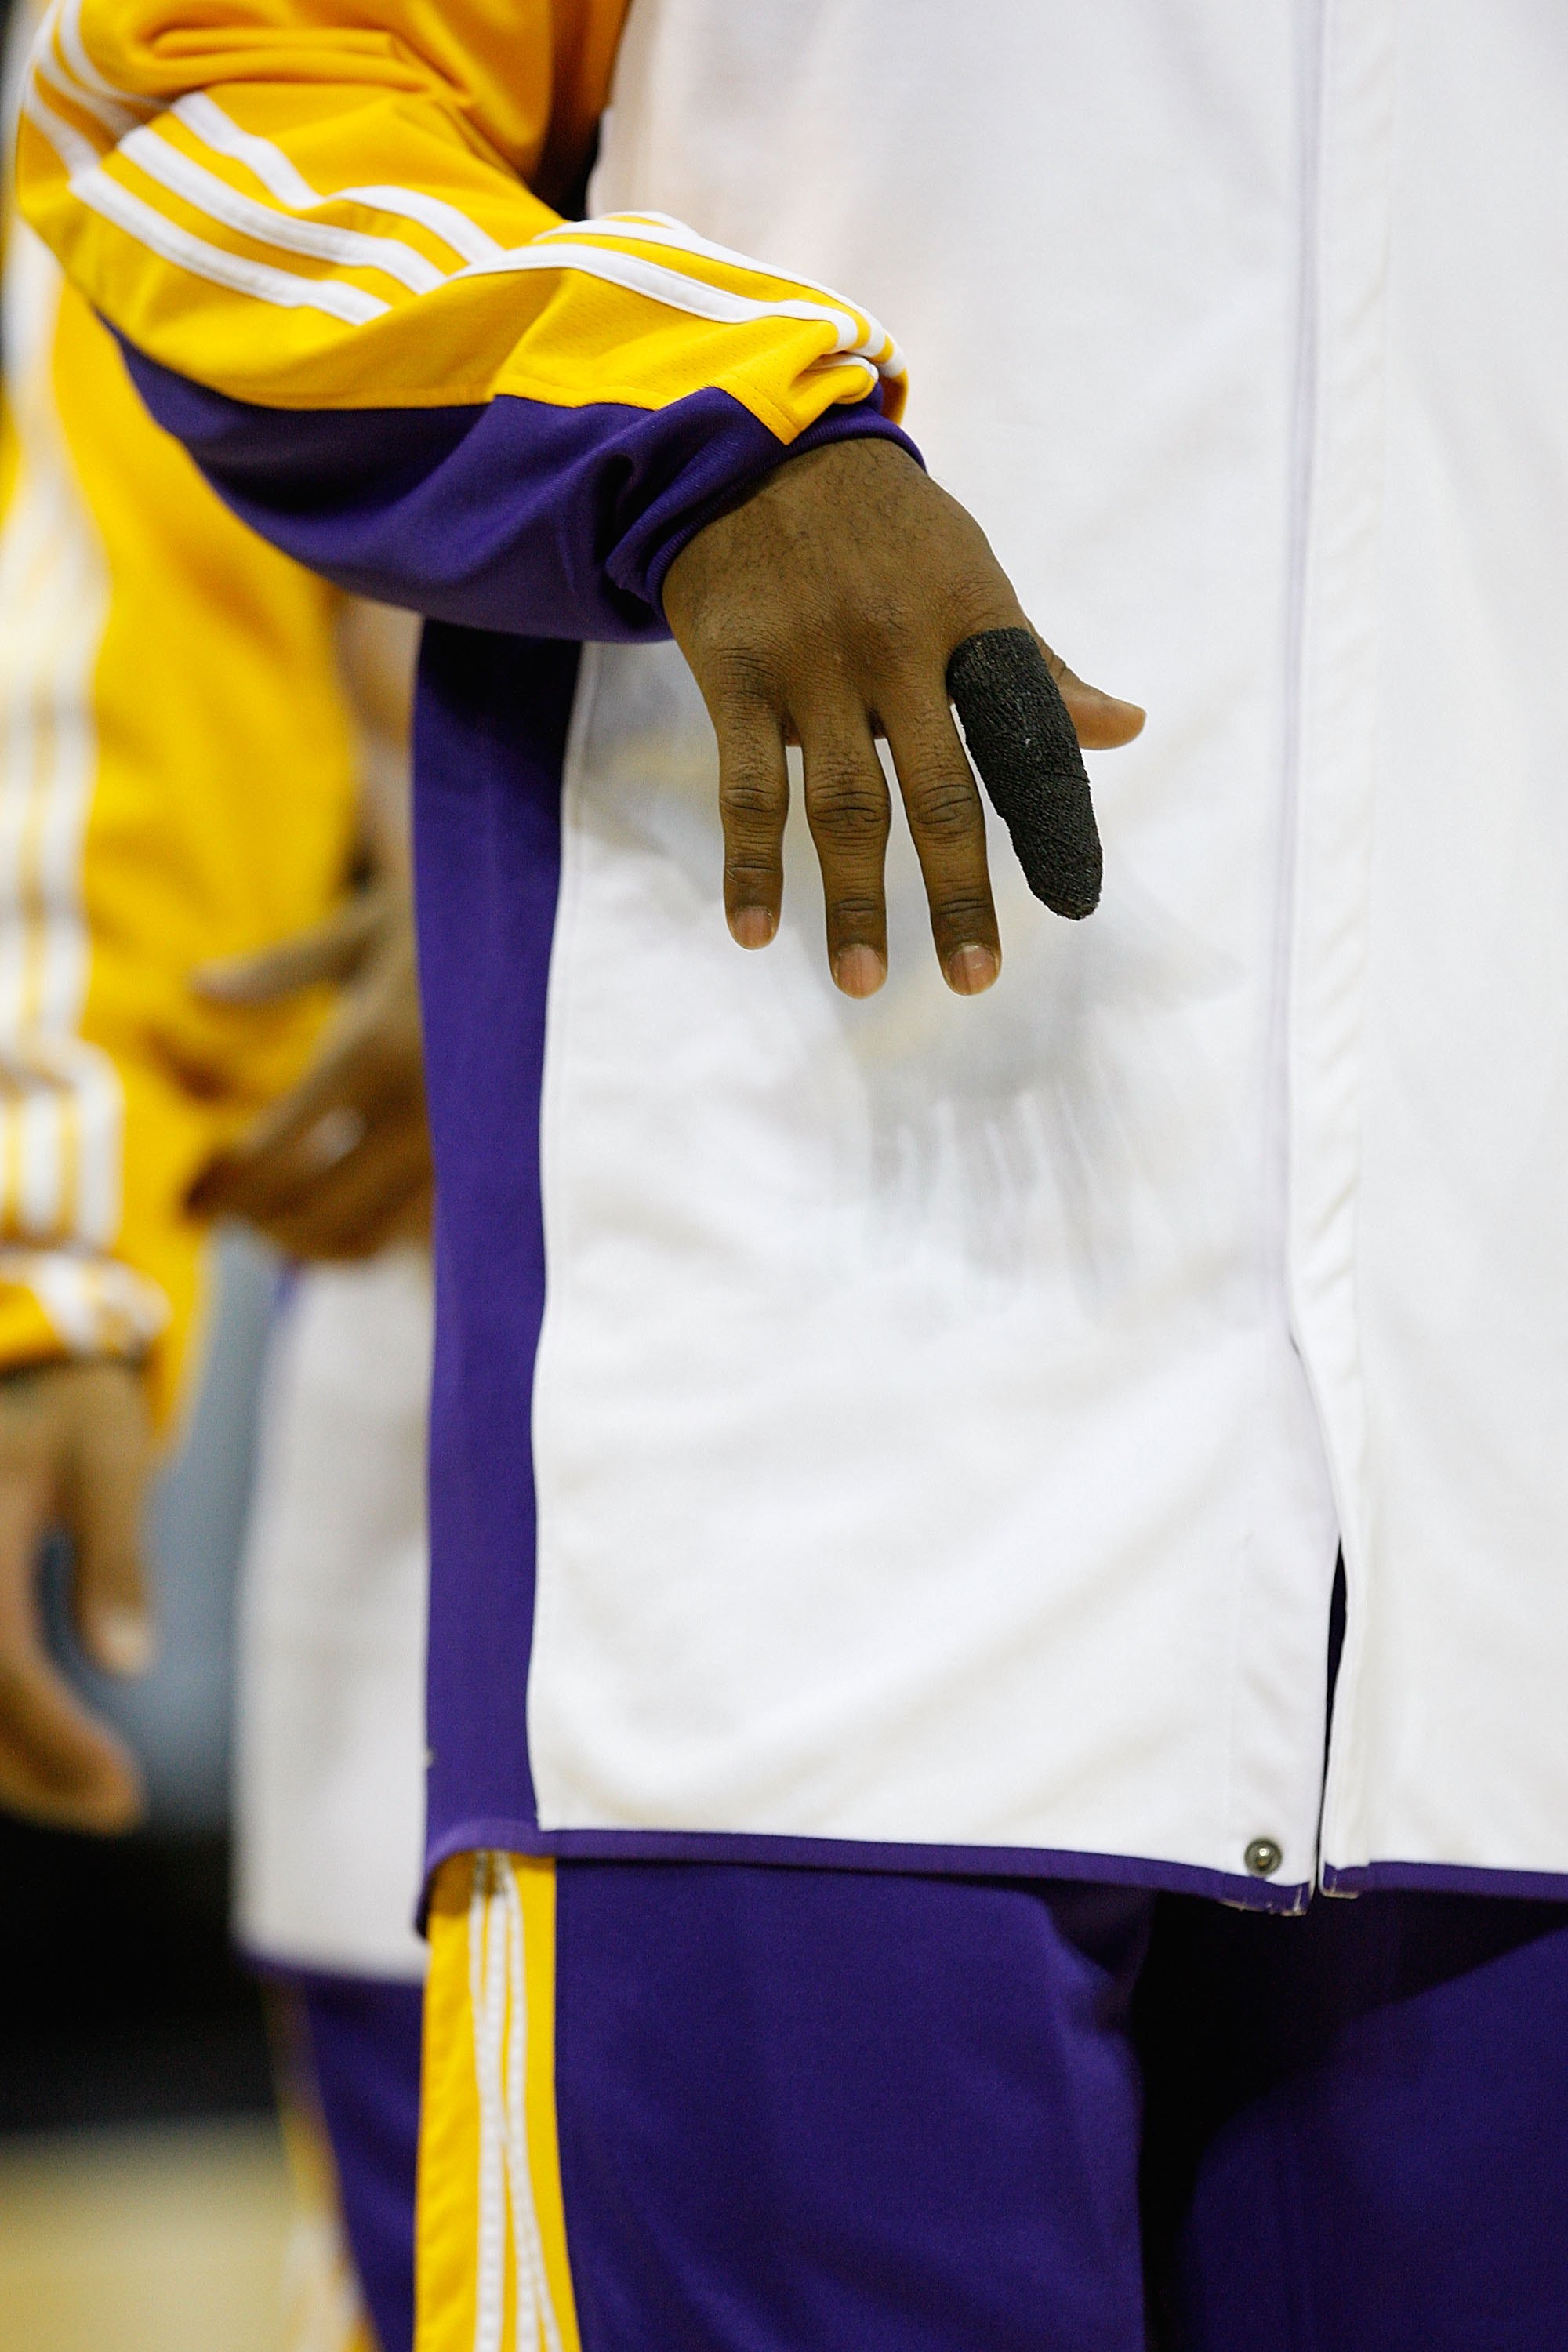 SAN ANTONIO - JANUARY 12:  The injured right index finger of Kobe Bryant #24 of the Los Angeles Lakers  on January 12, 2010 at AT&T Center in San Antonio, Texas.  NOTE TO USER: User expressly acknowledges and agrees that, by downloading and/or using this 